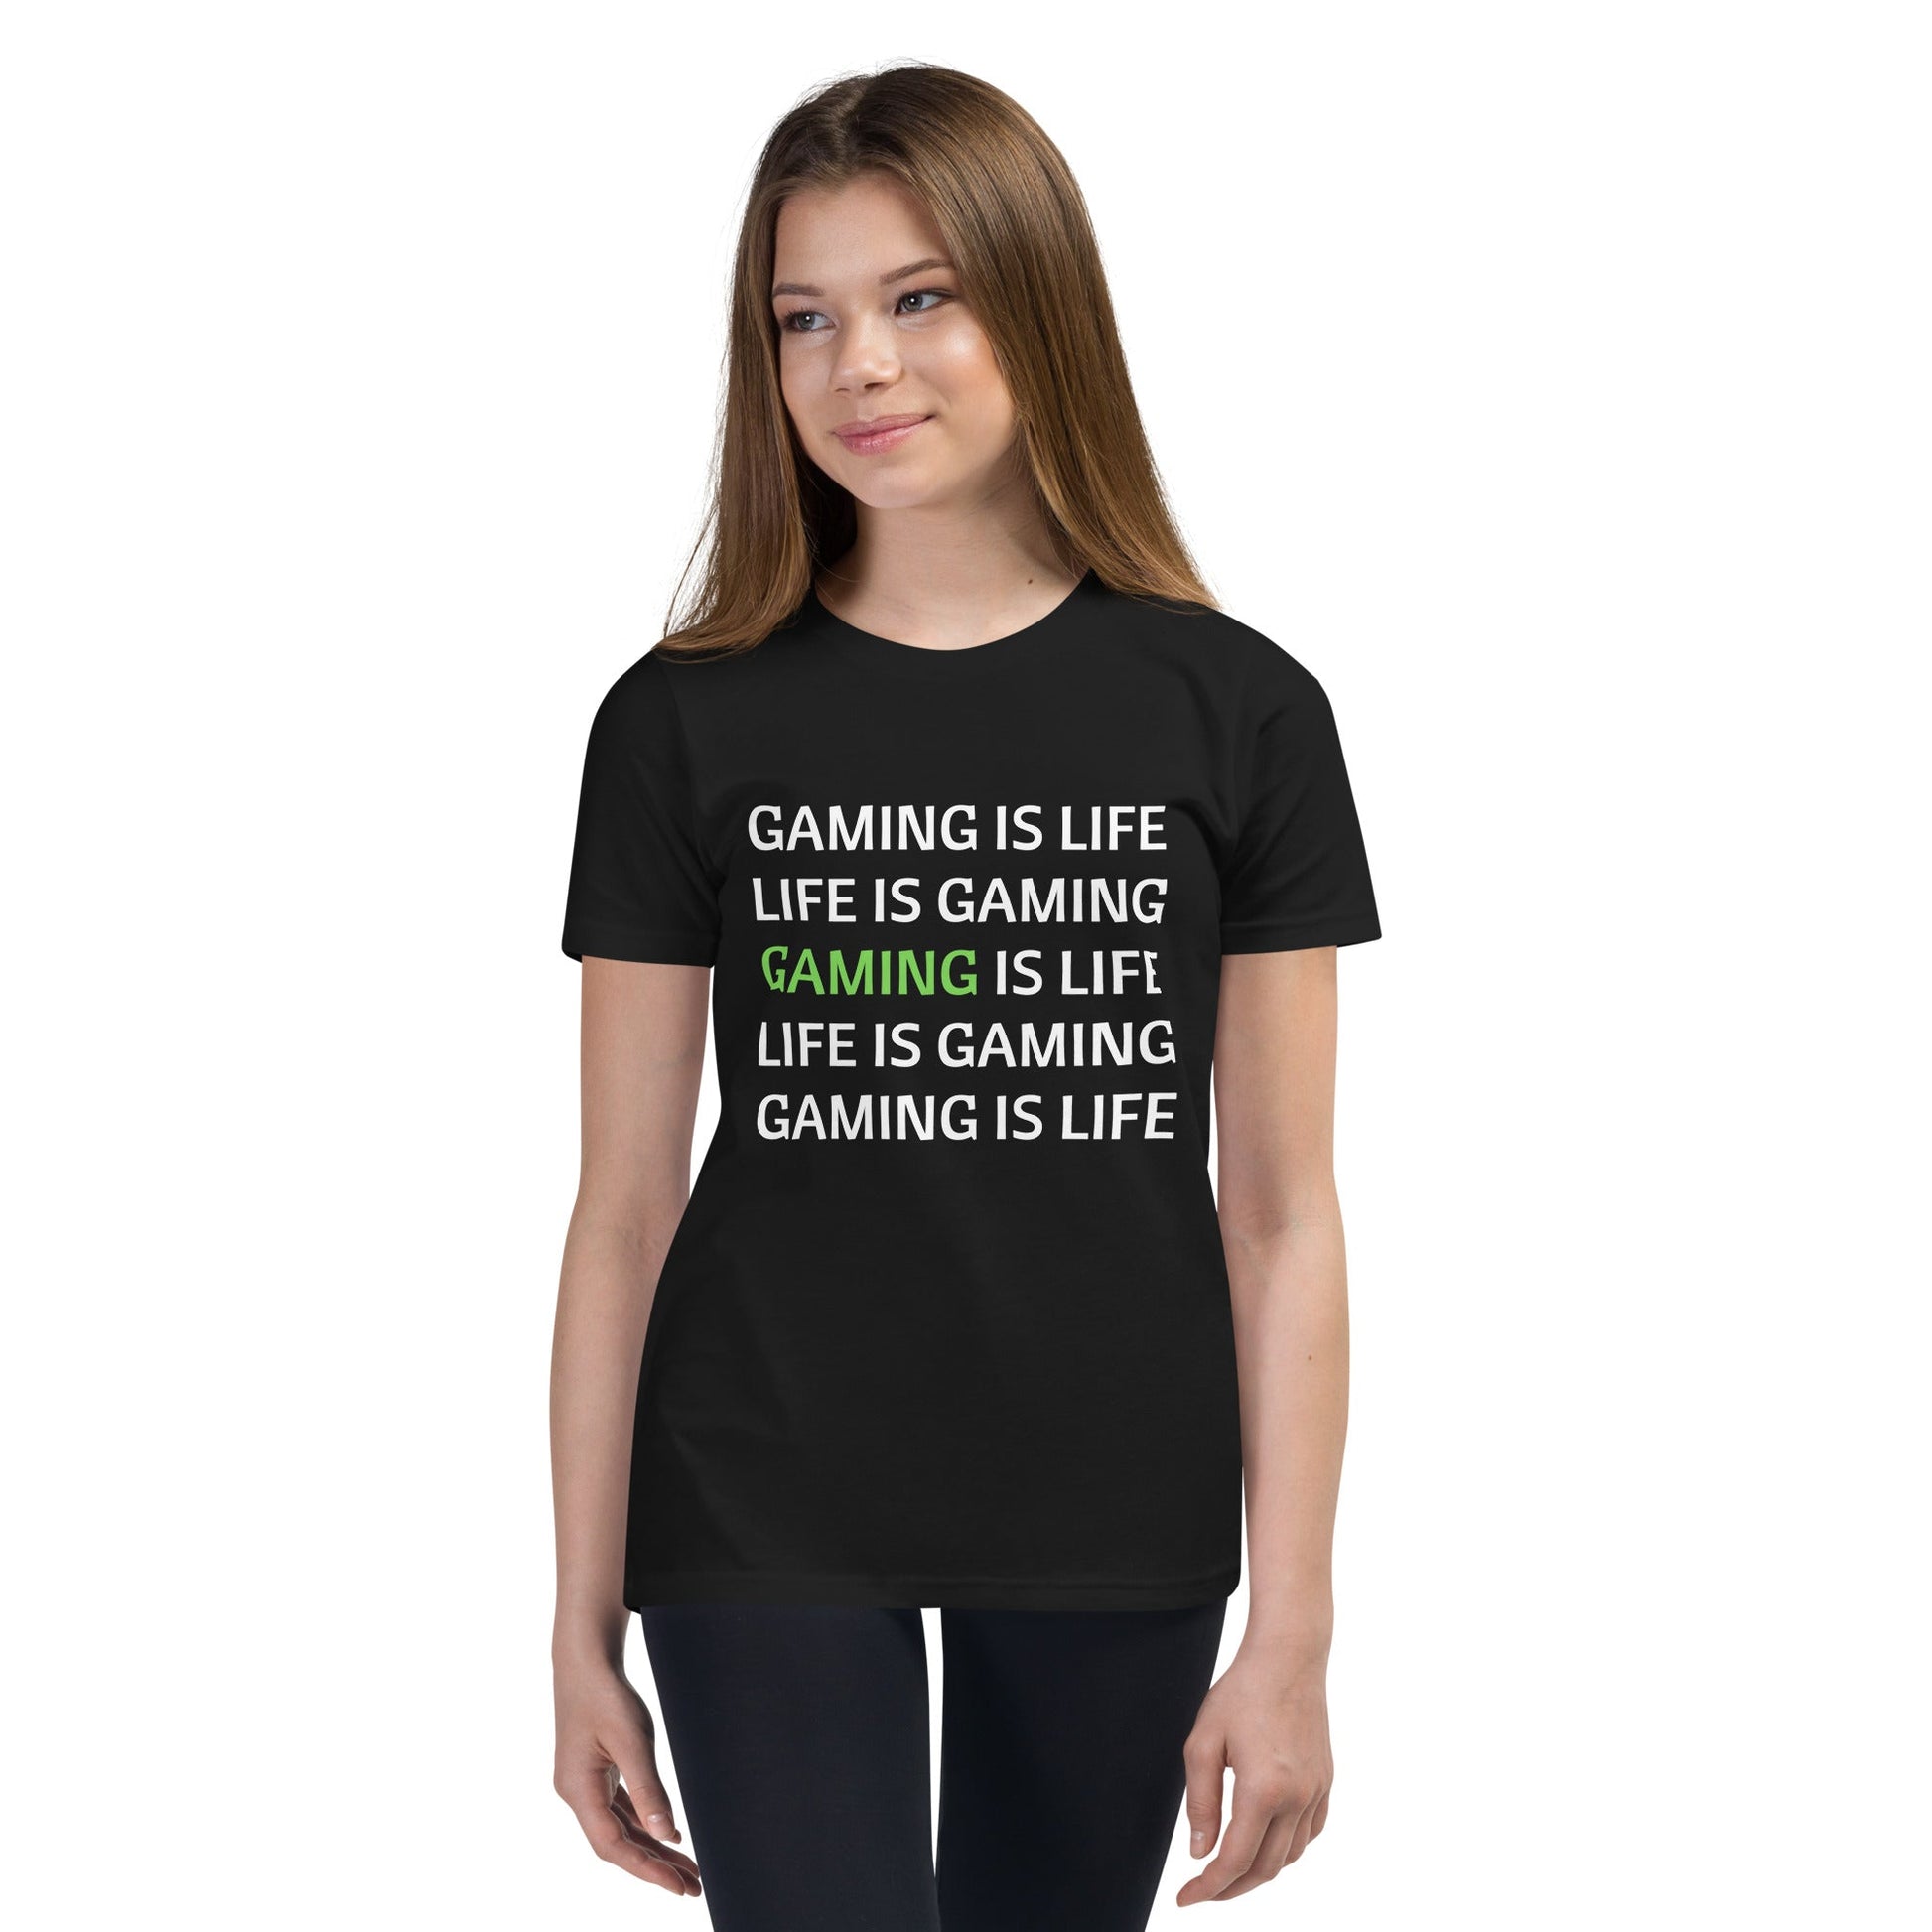 GAMING IS LIFE | Youth Short Sleeve T-Shirt